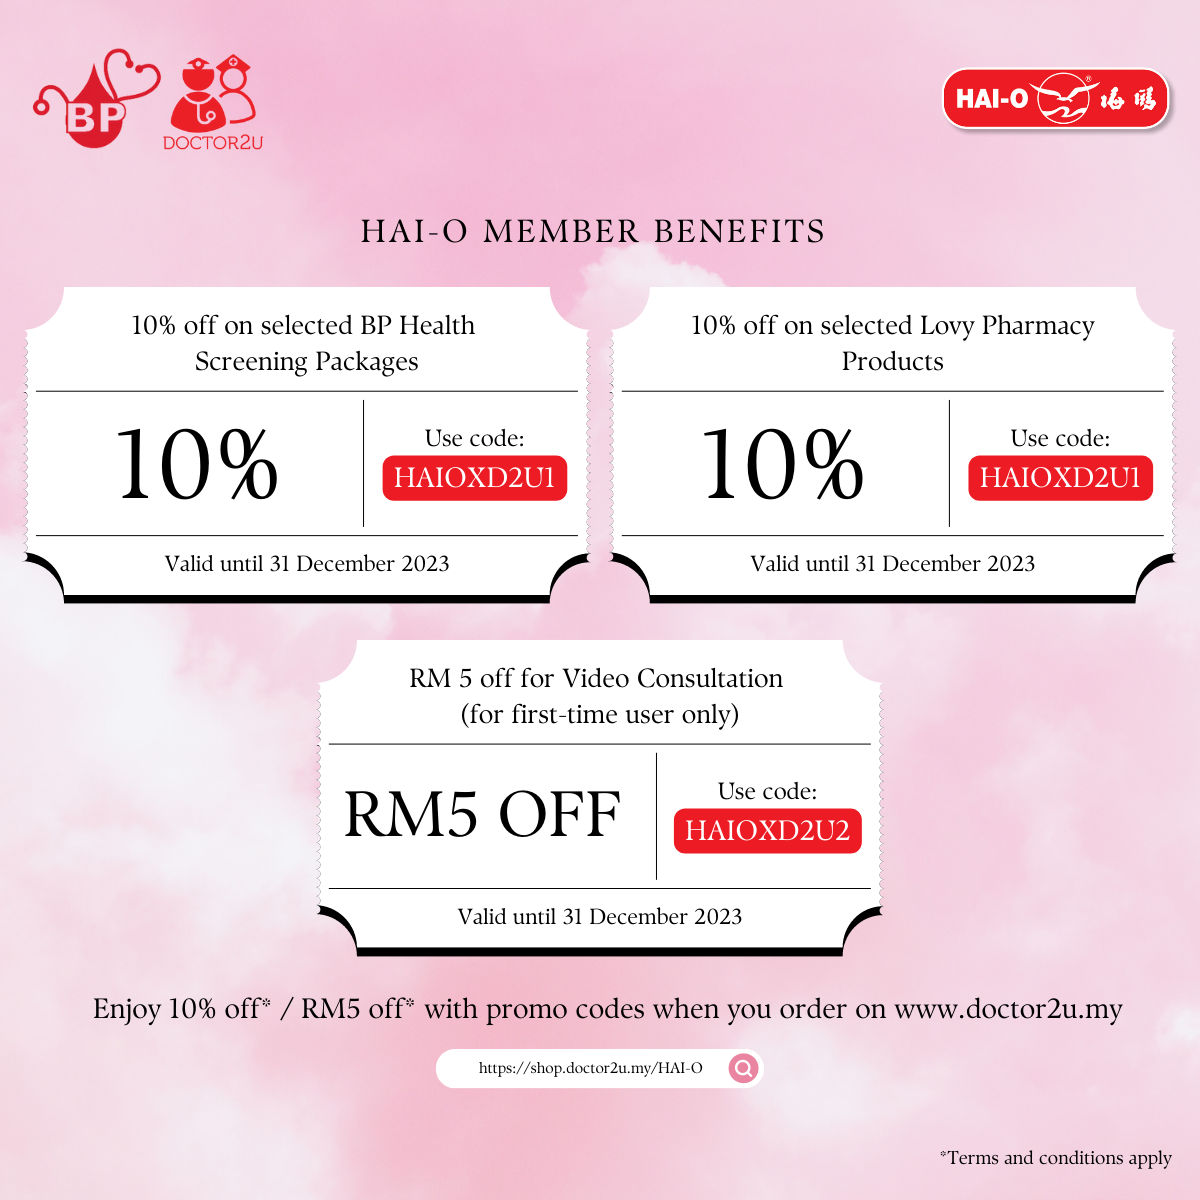 DOCTOR2U: ENJOY 10% OFF* / RM5 OFF* WITH PROMO CODES WHEN YOU ORDER ON WWW.DOCTOR2U.MY